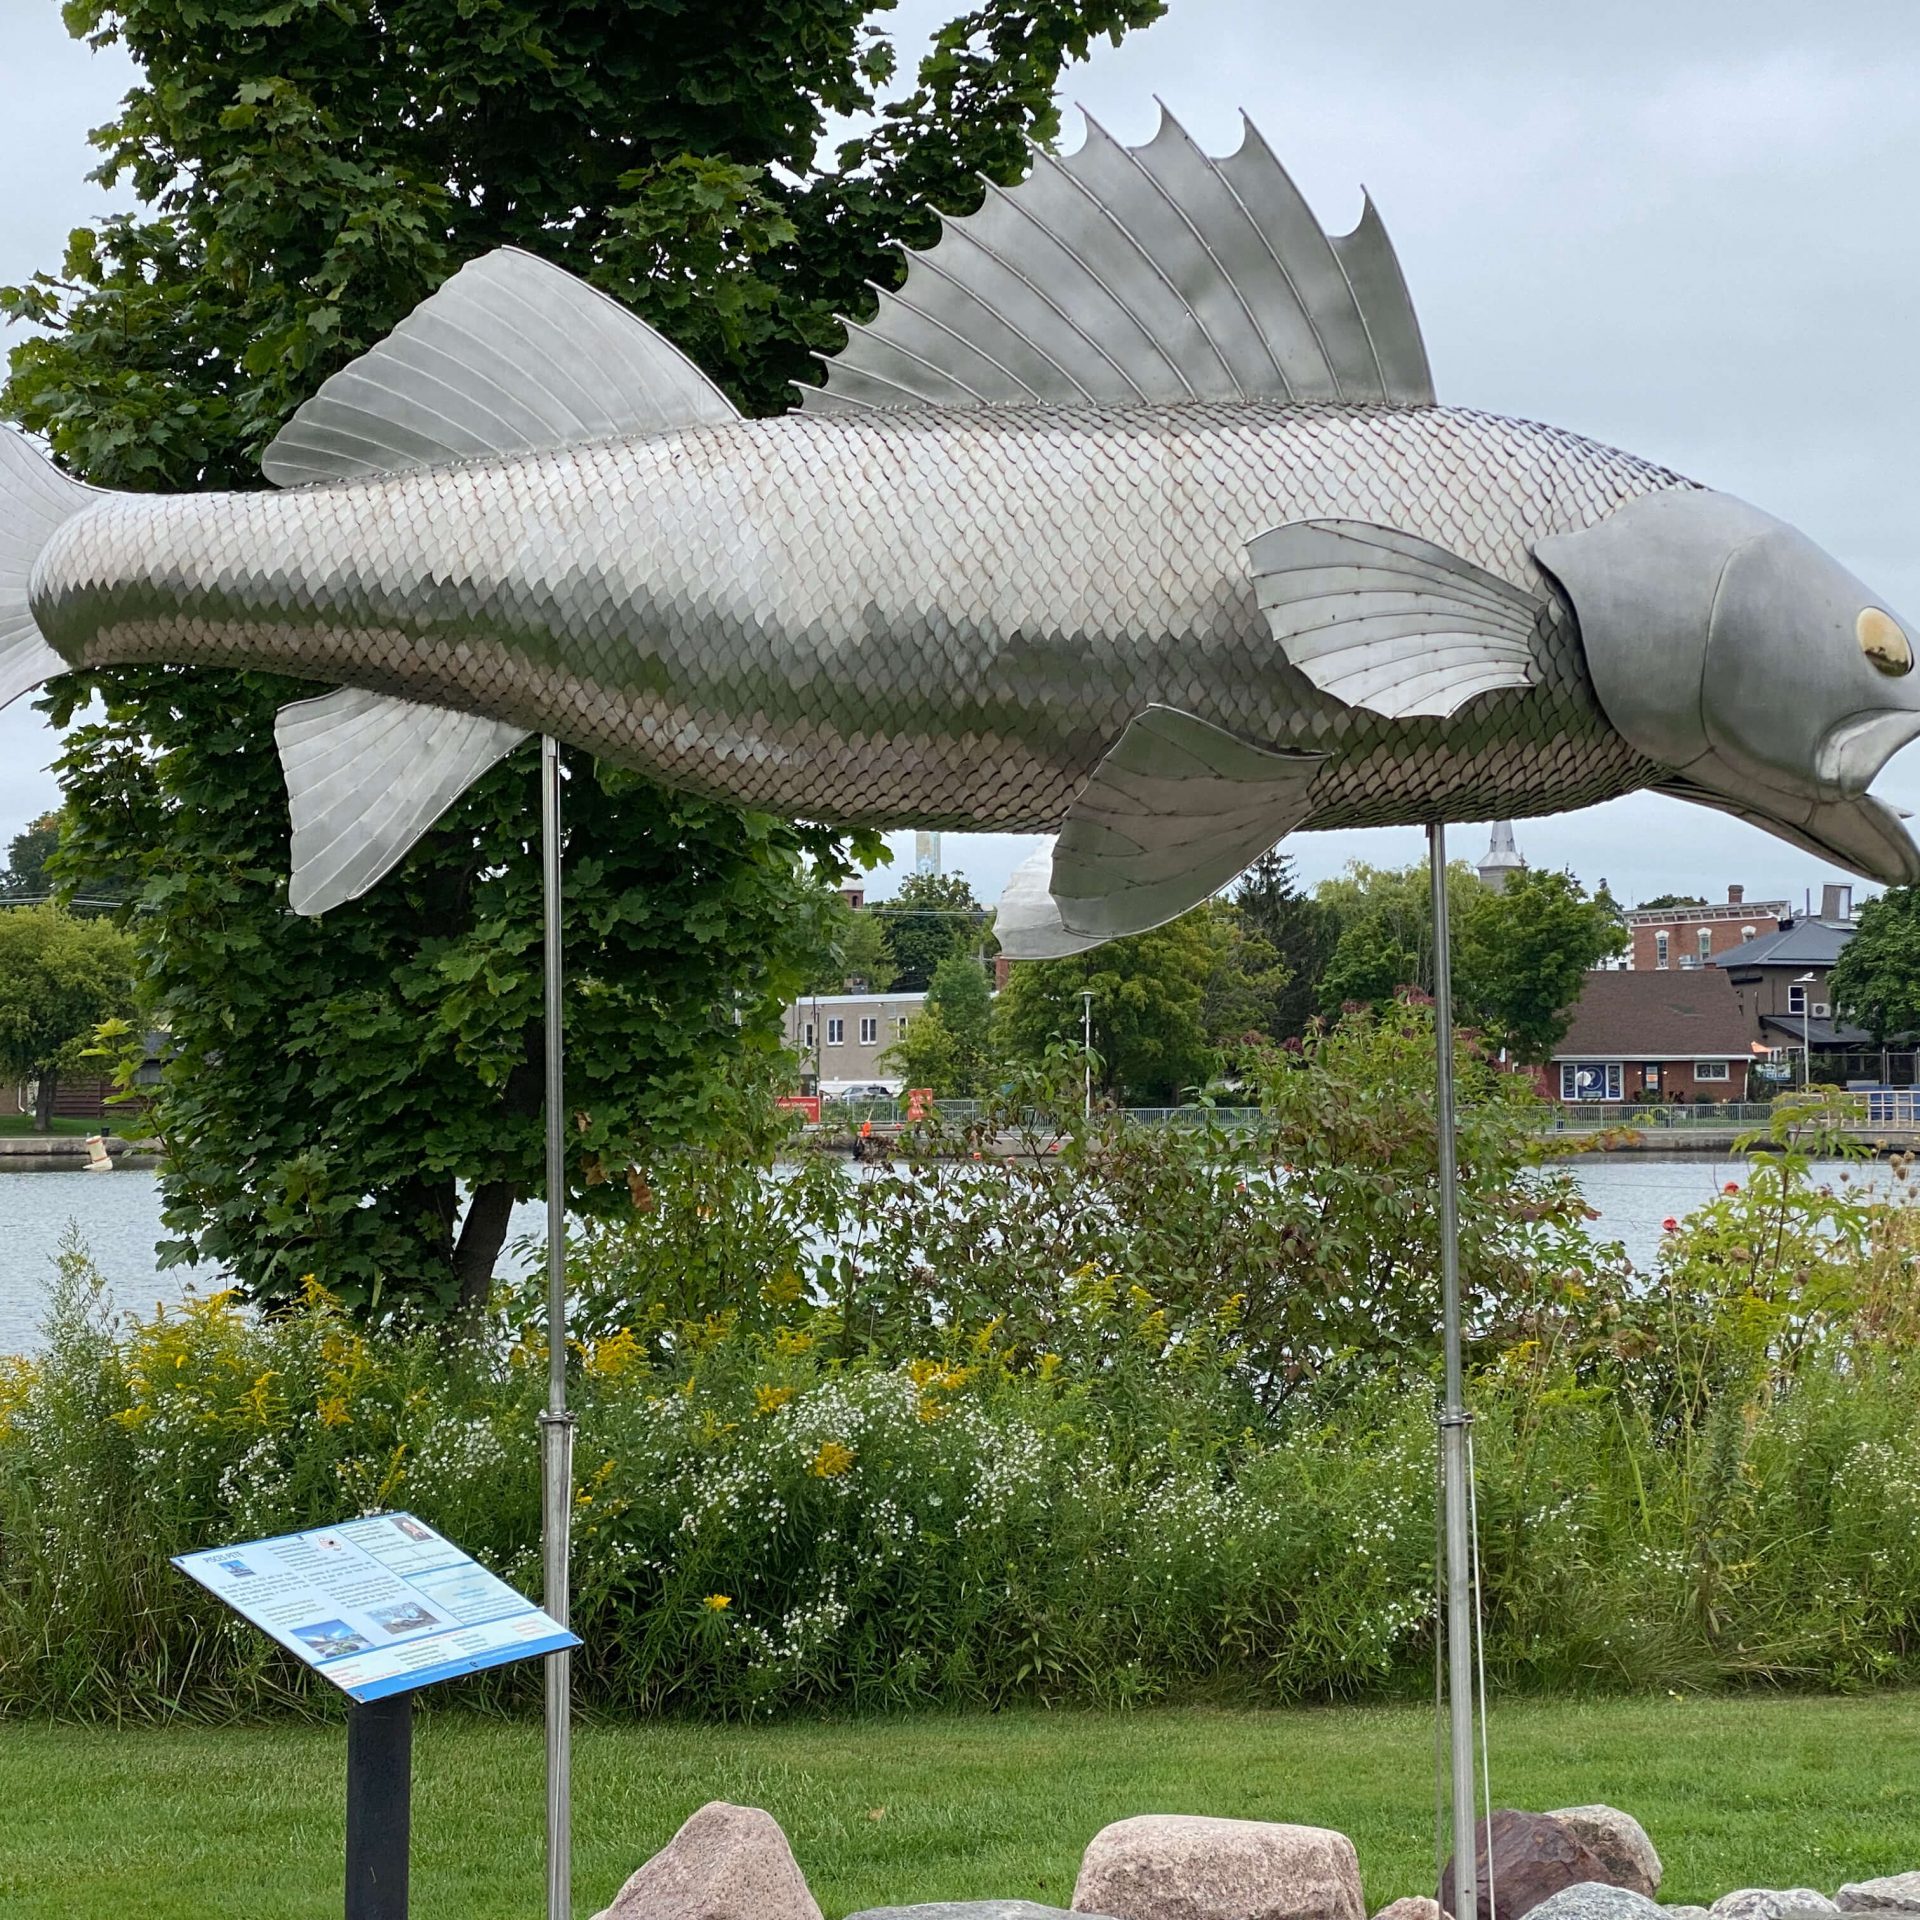 Walleye the Hastings Fish-A statue of the type of fish that is found in the Trent River